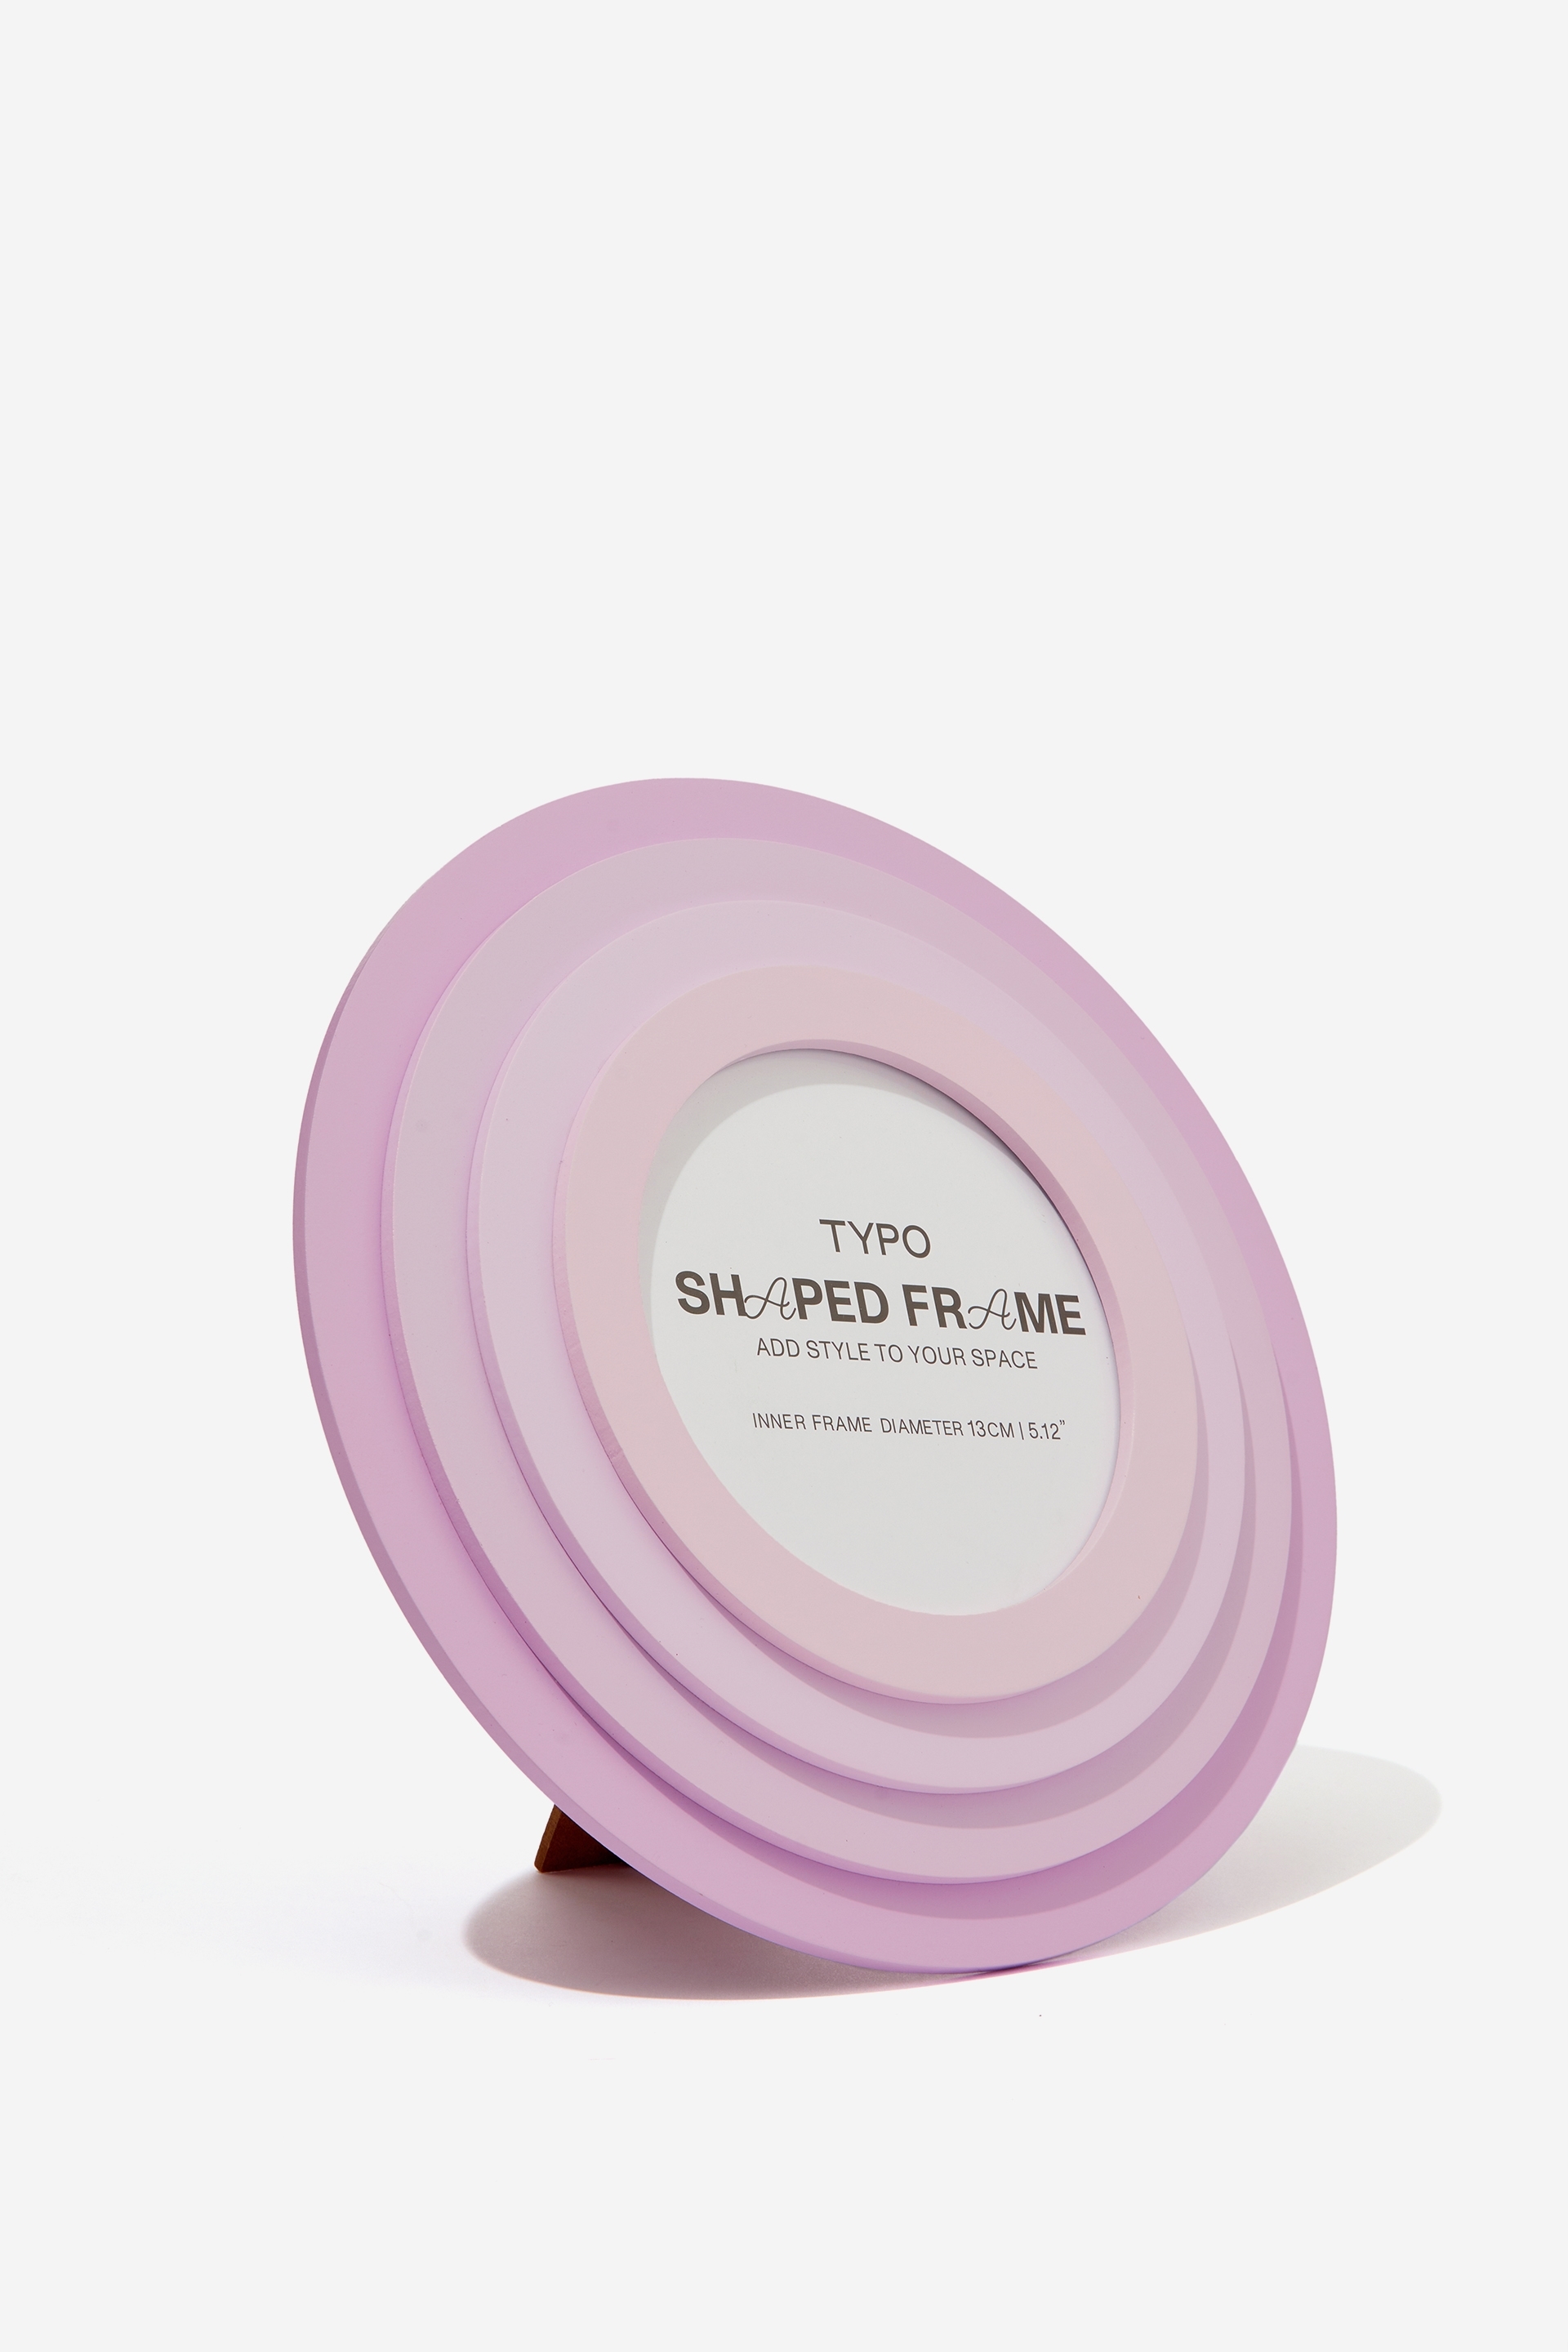 Typo - Shaped Photo Frame - Round pale lavender